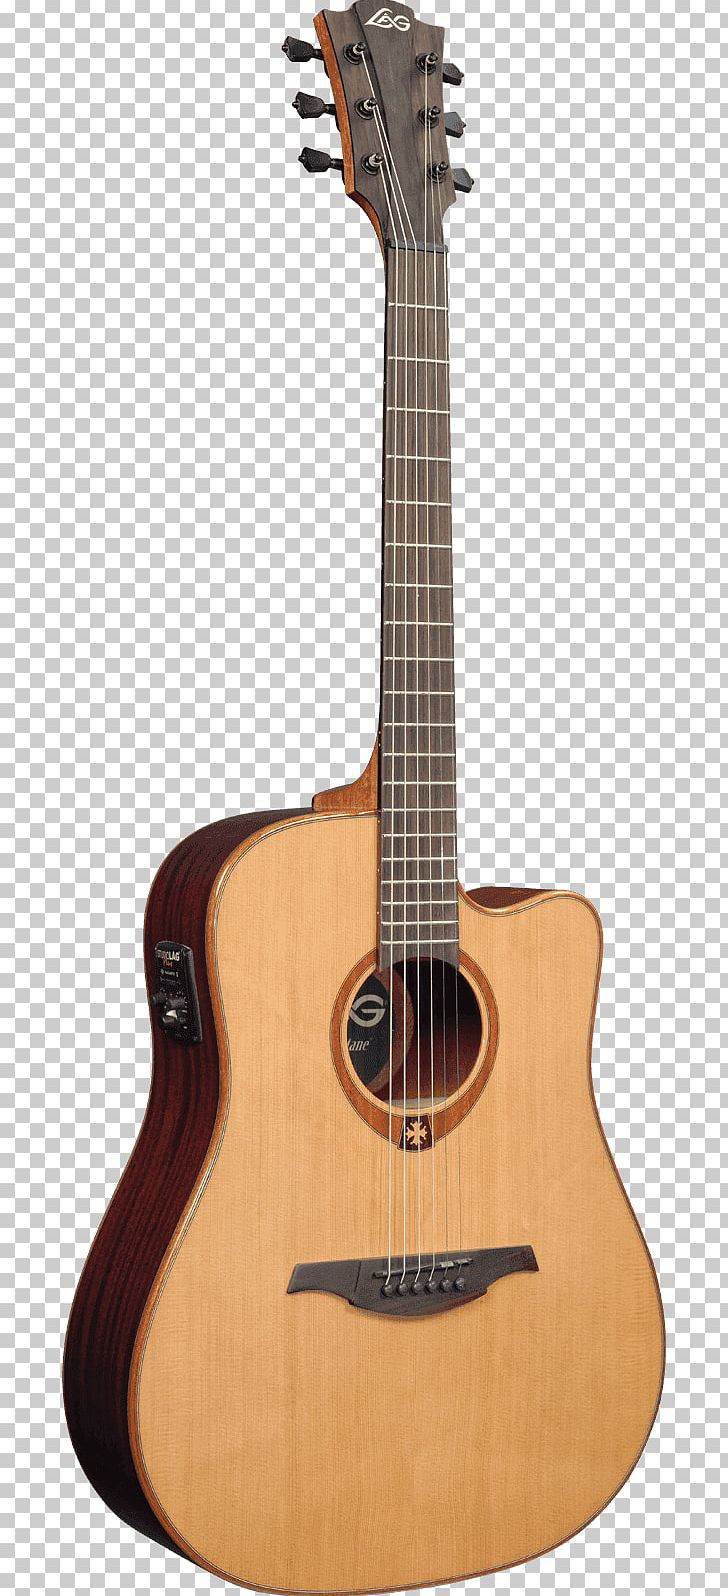 Steel-string Acoustic Guitar Classical Guitar Musical Instruments Acoustic-electric Guitar PNG, Clipart, Acoustic Electric Guitar, Classical Guitar, Cuatro, Guitar Accessory, Musical Instruments Free PNG Download